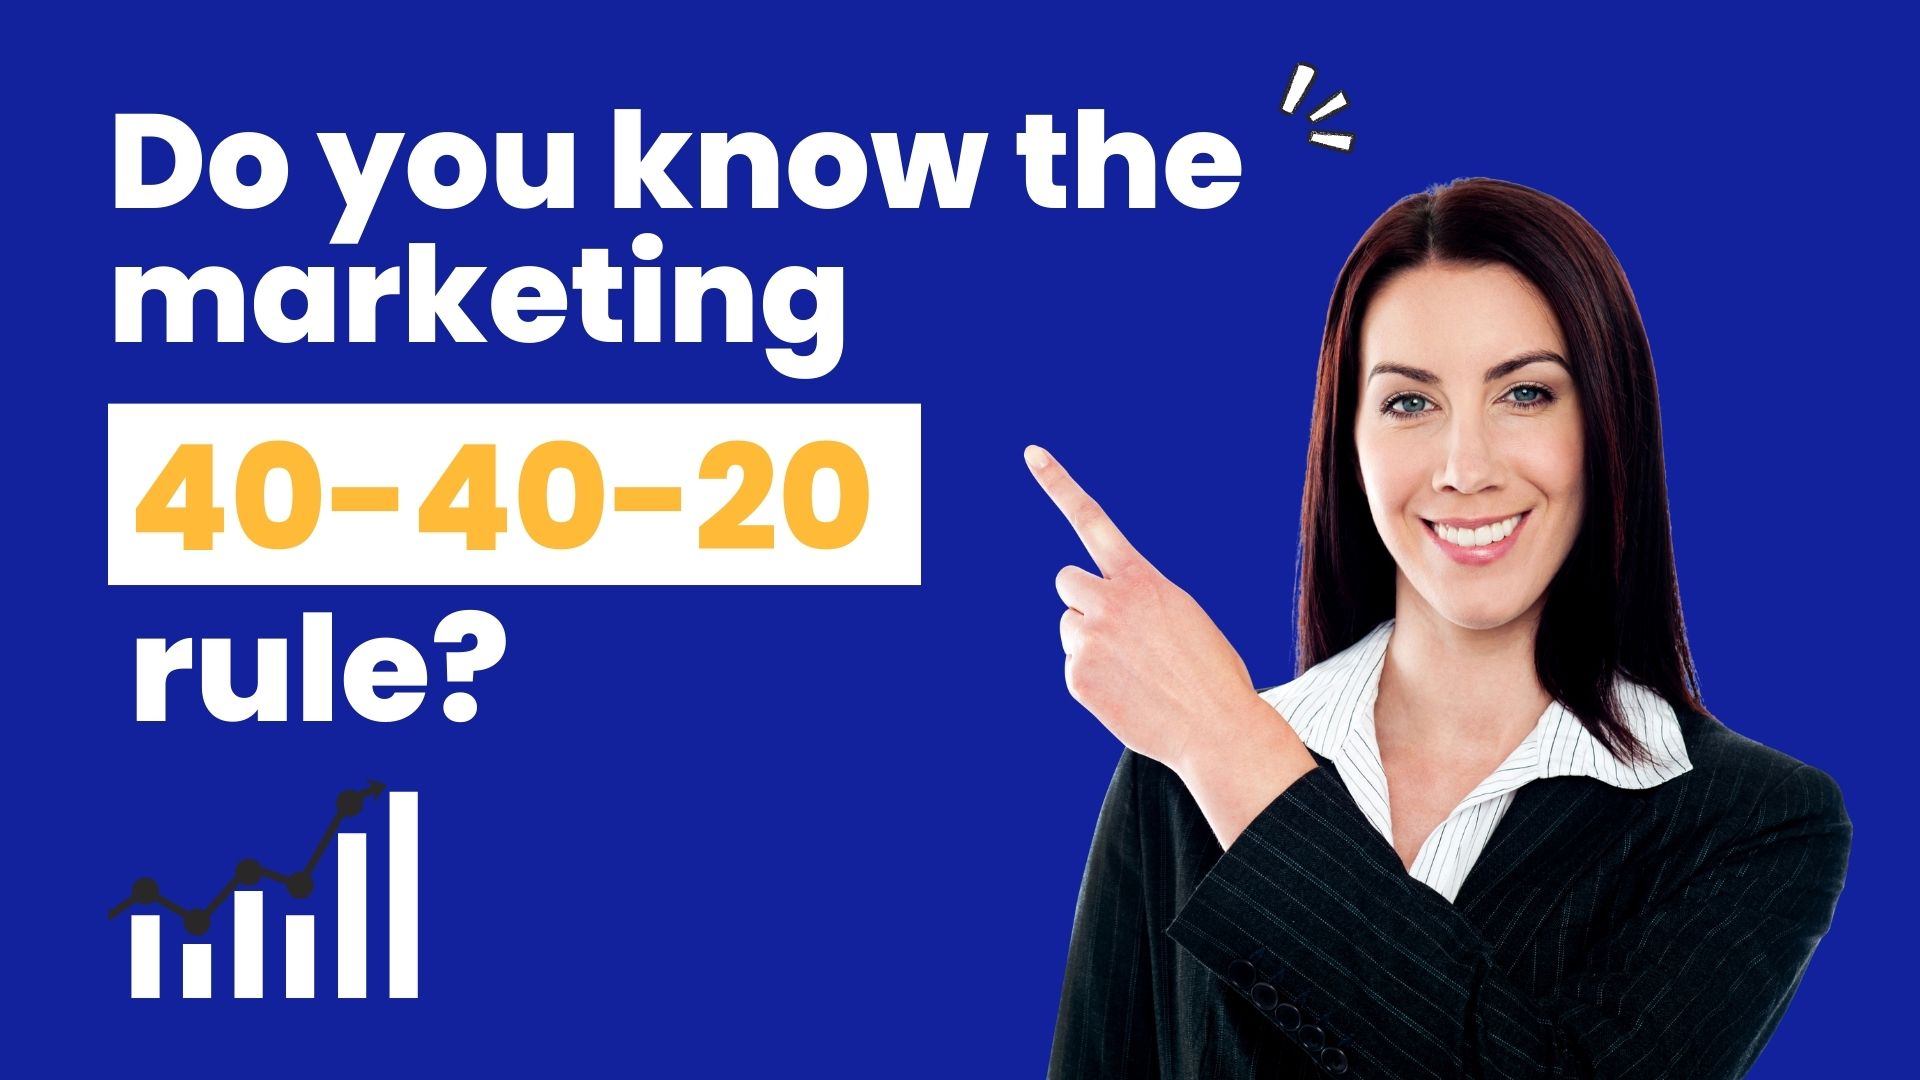 Understanding the marketing rule 40-40-20: A blueprint for effective marketing strategies